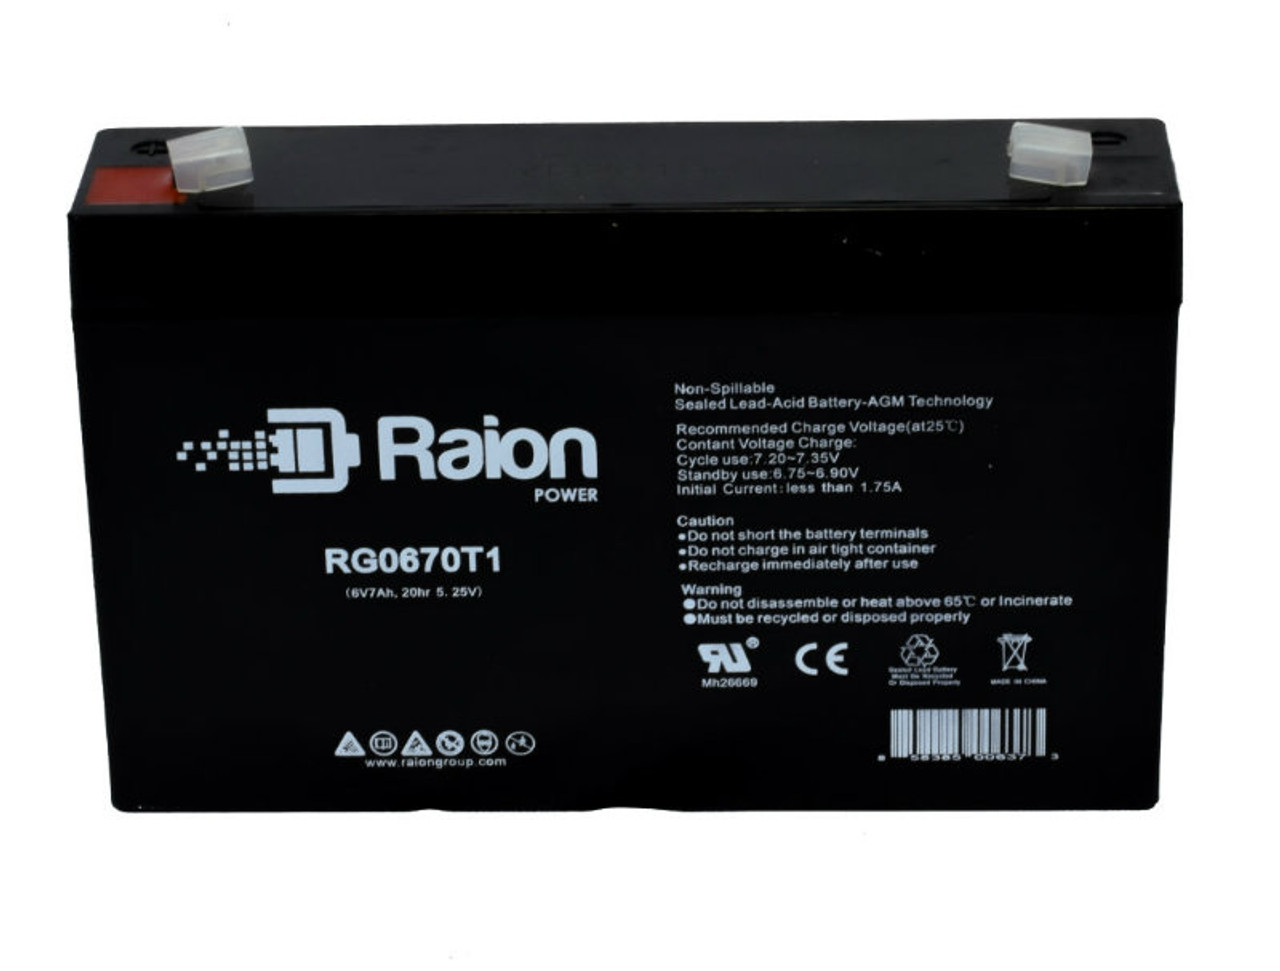 Raion Power RG0670T1 Replacement Battery Cartridge for Light Alarms 2RCI